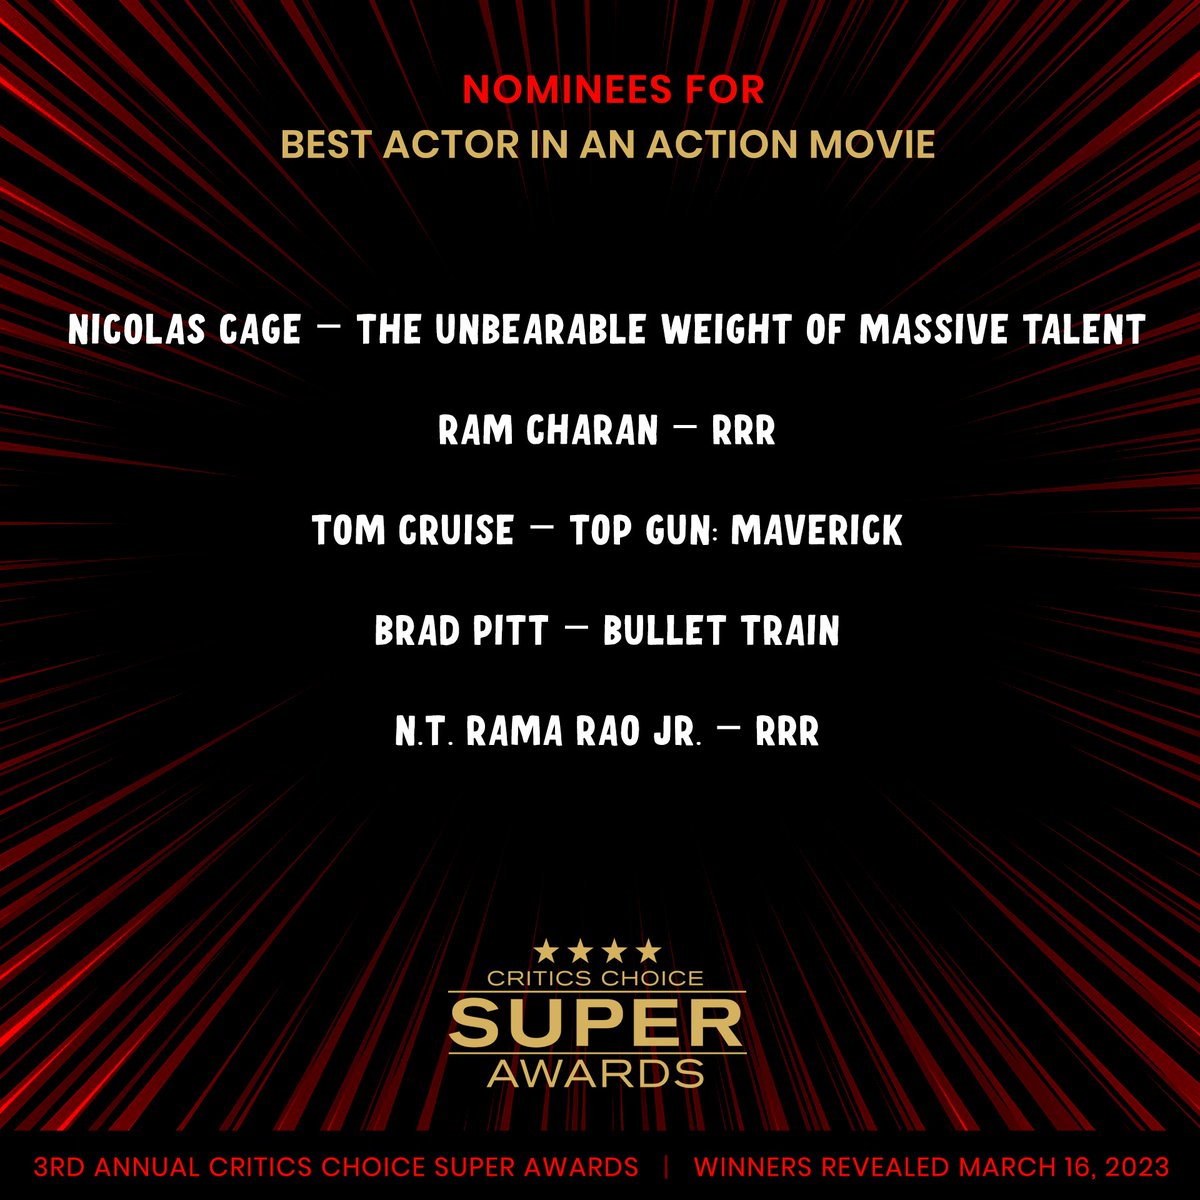 #RamCharan nominated for #CriticsChoice BEST ACTOR IN AN ACTION MOVIE 💥👍

#SuperAwards winners will be announced on March 16.